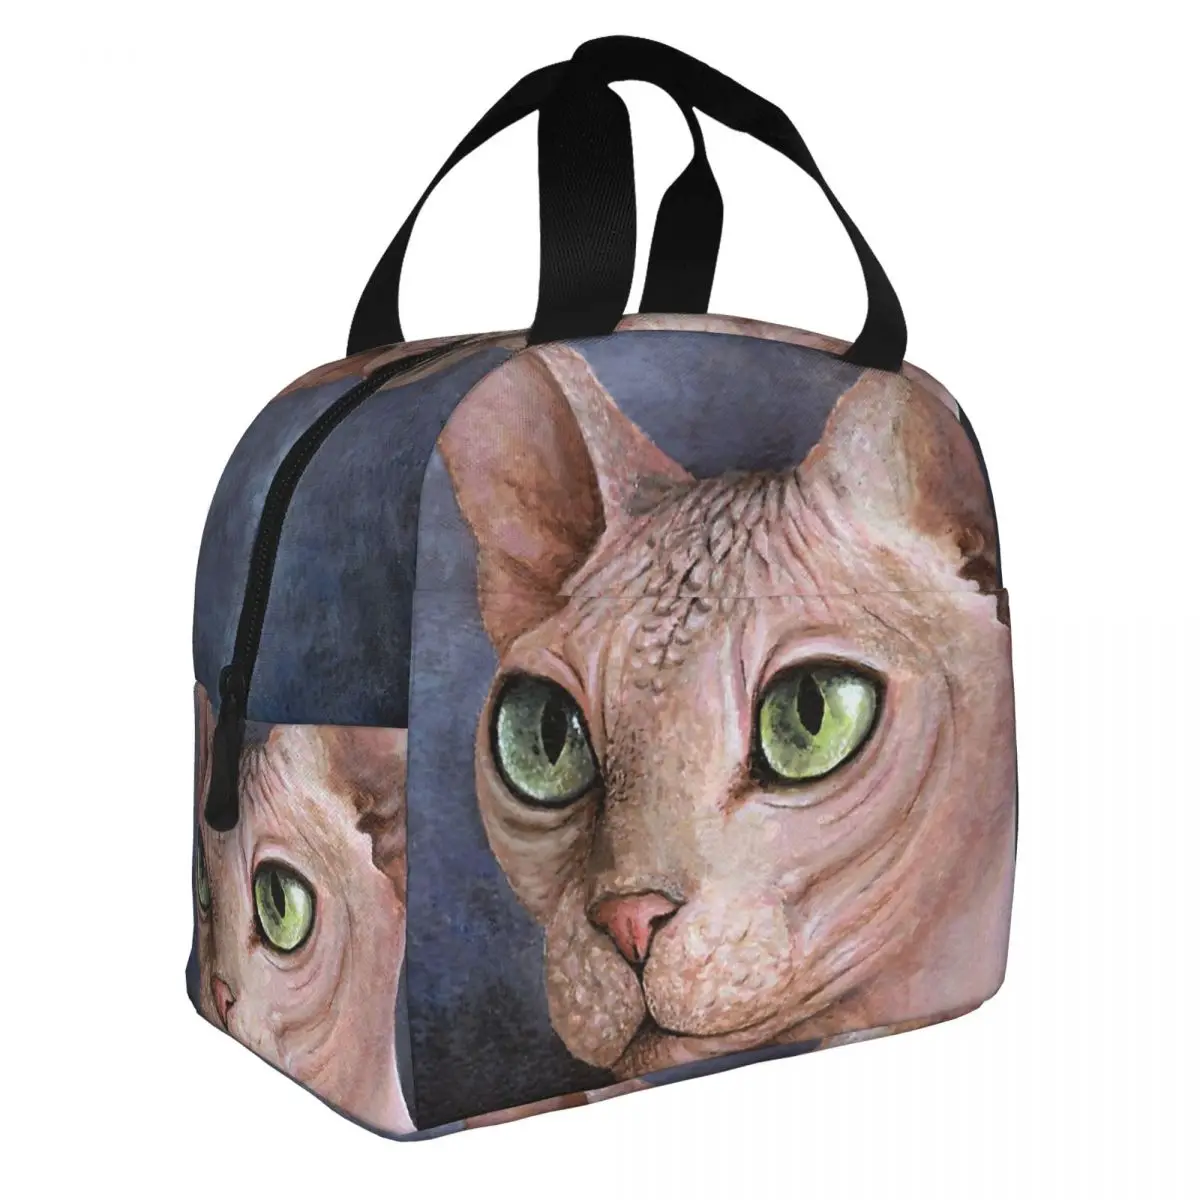 Sphynx Cat 6 (1) Lunch Bento Bags Portable Aluminum Foil thickened Thermal Cloth Lunch Bag for Women Men Boy